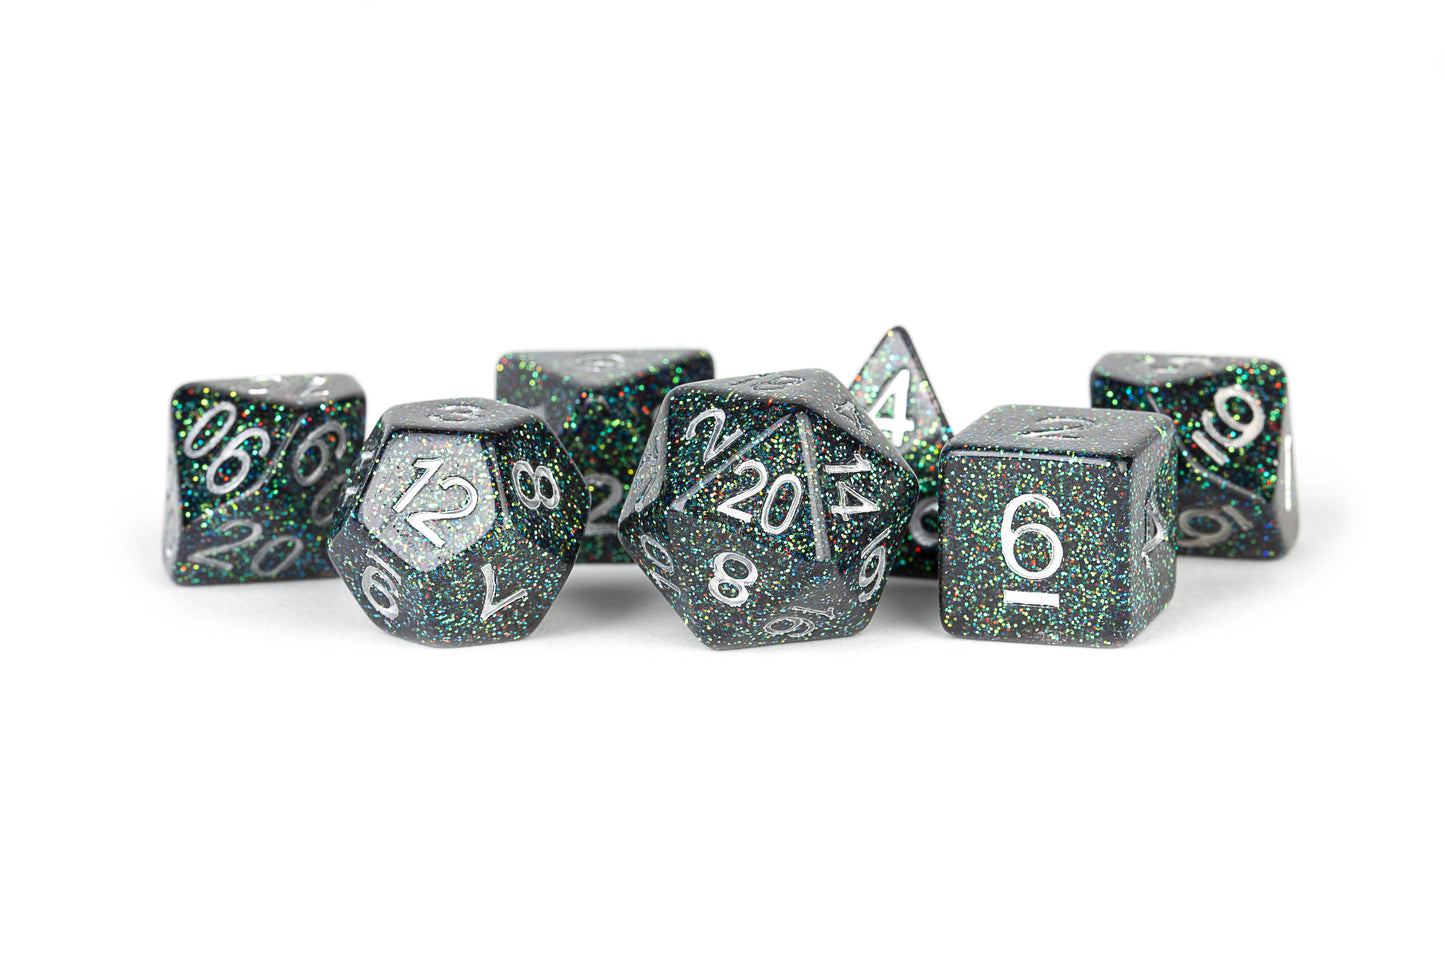 16mm Resin Poly Dice Set - Astro Mica (7)